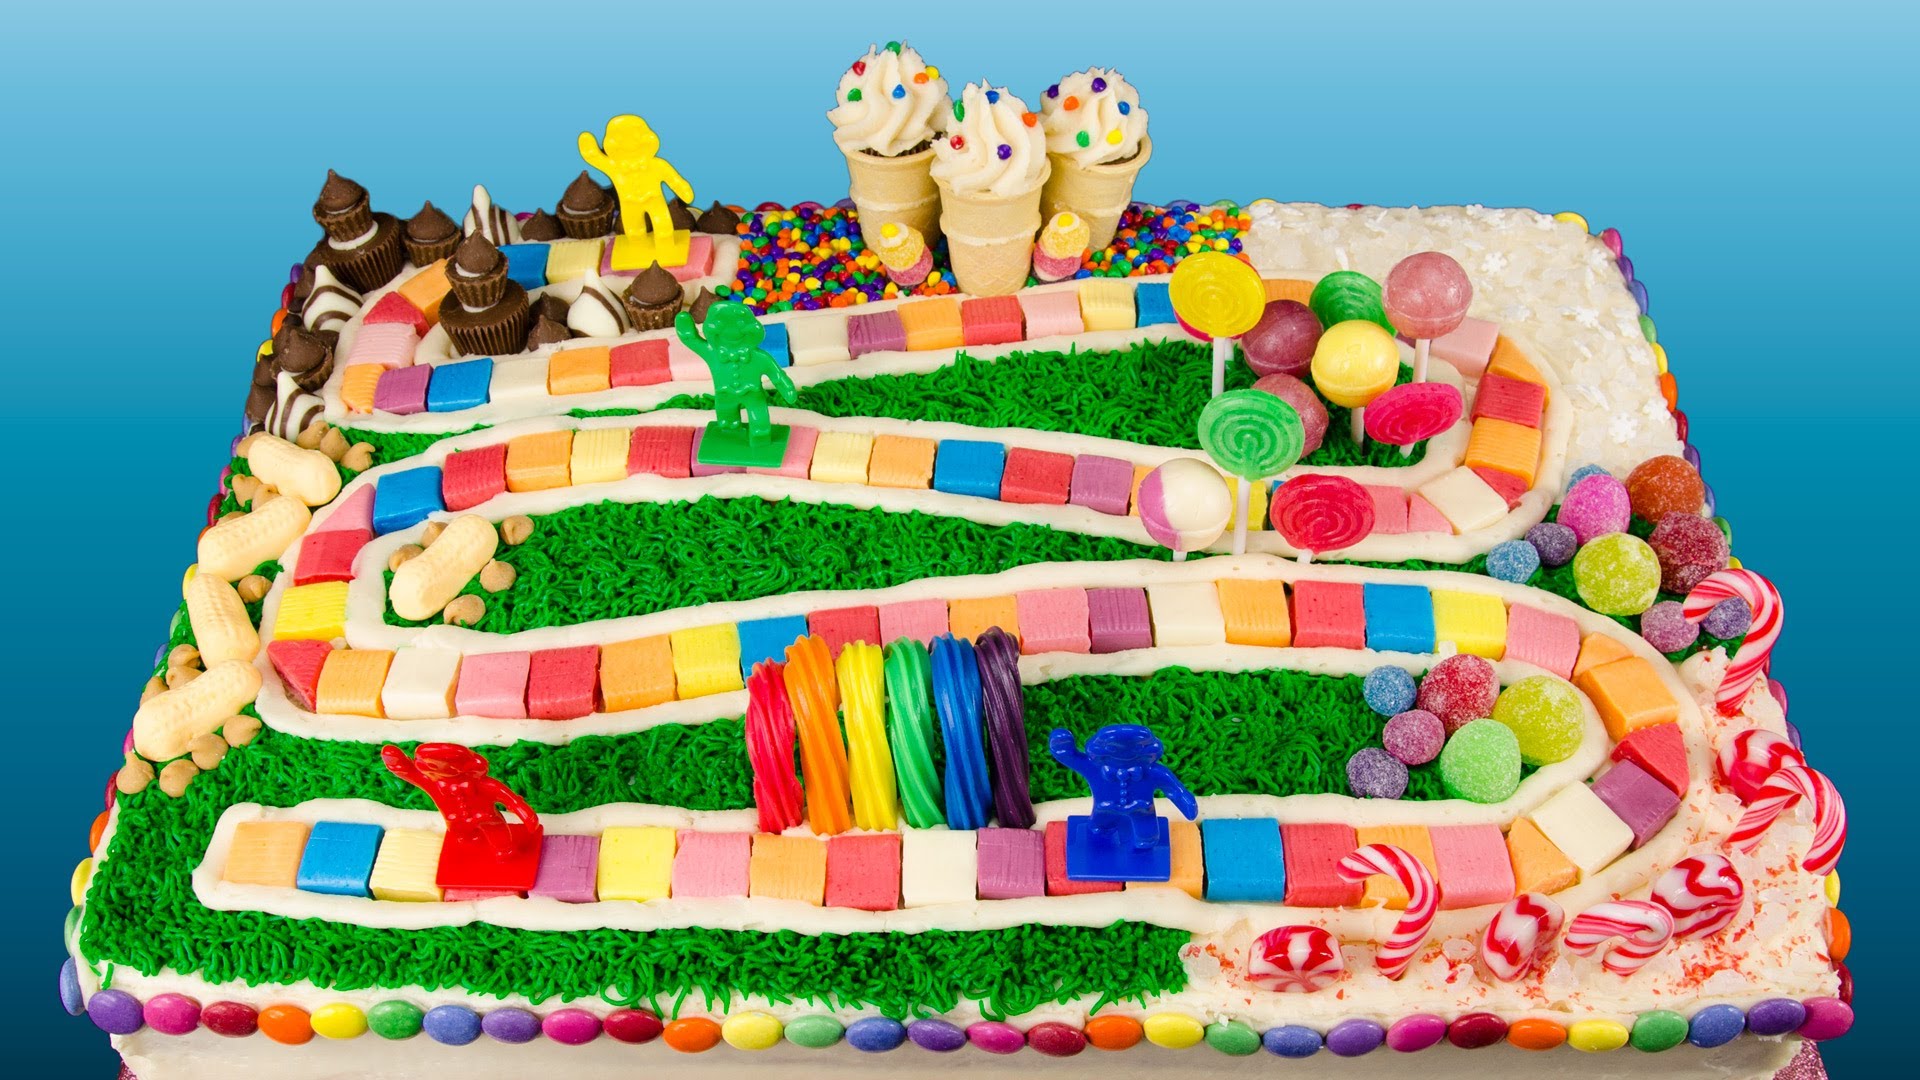 How To Make A Candyland Cake From Cookies Cupcakes - Make A Candyland Cake , HD Wallpaper & Backgrounds